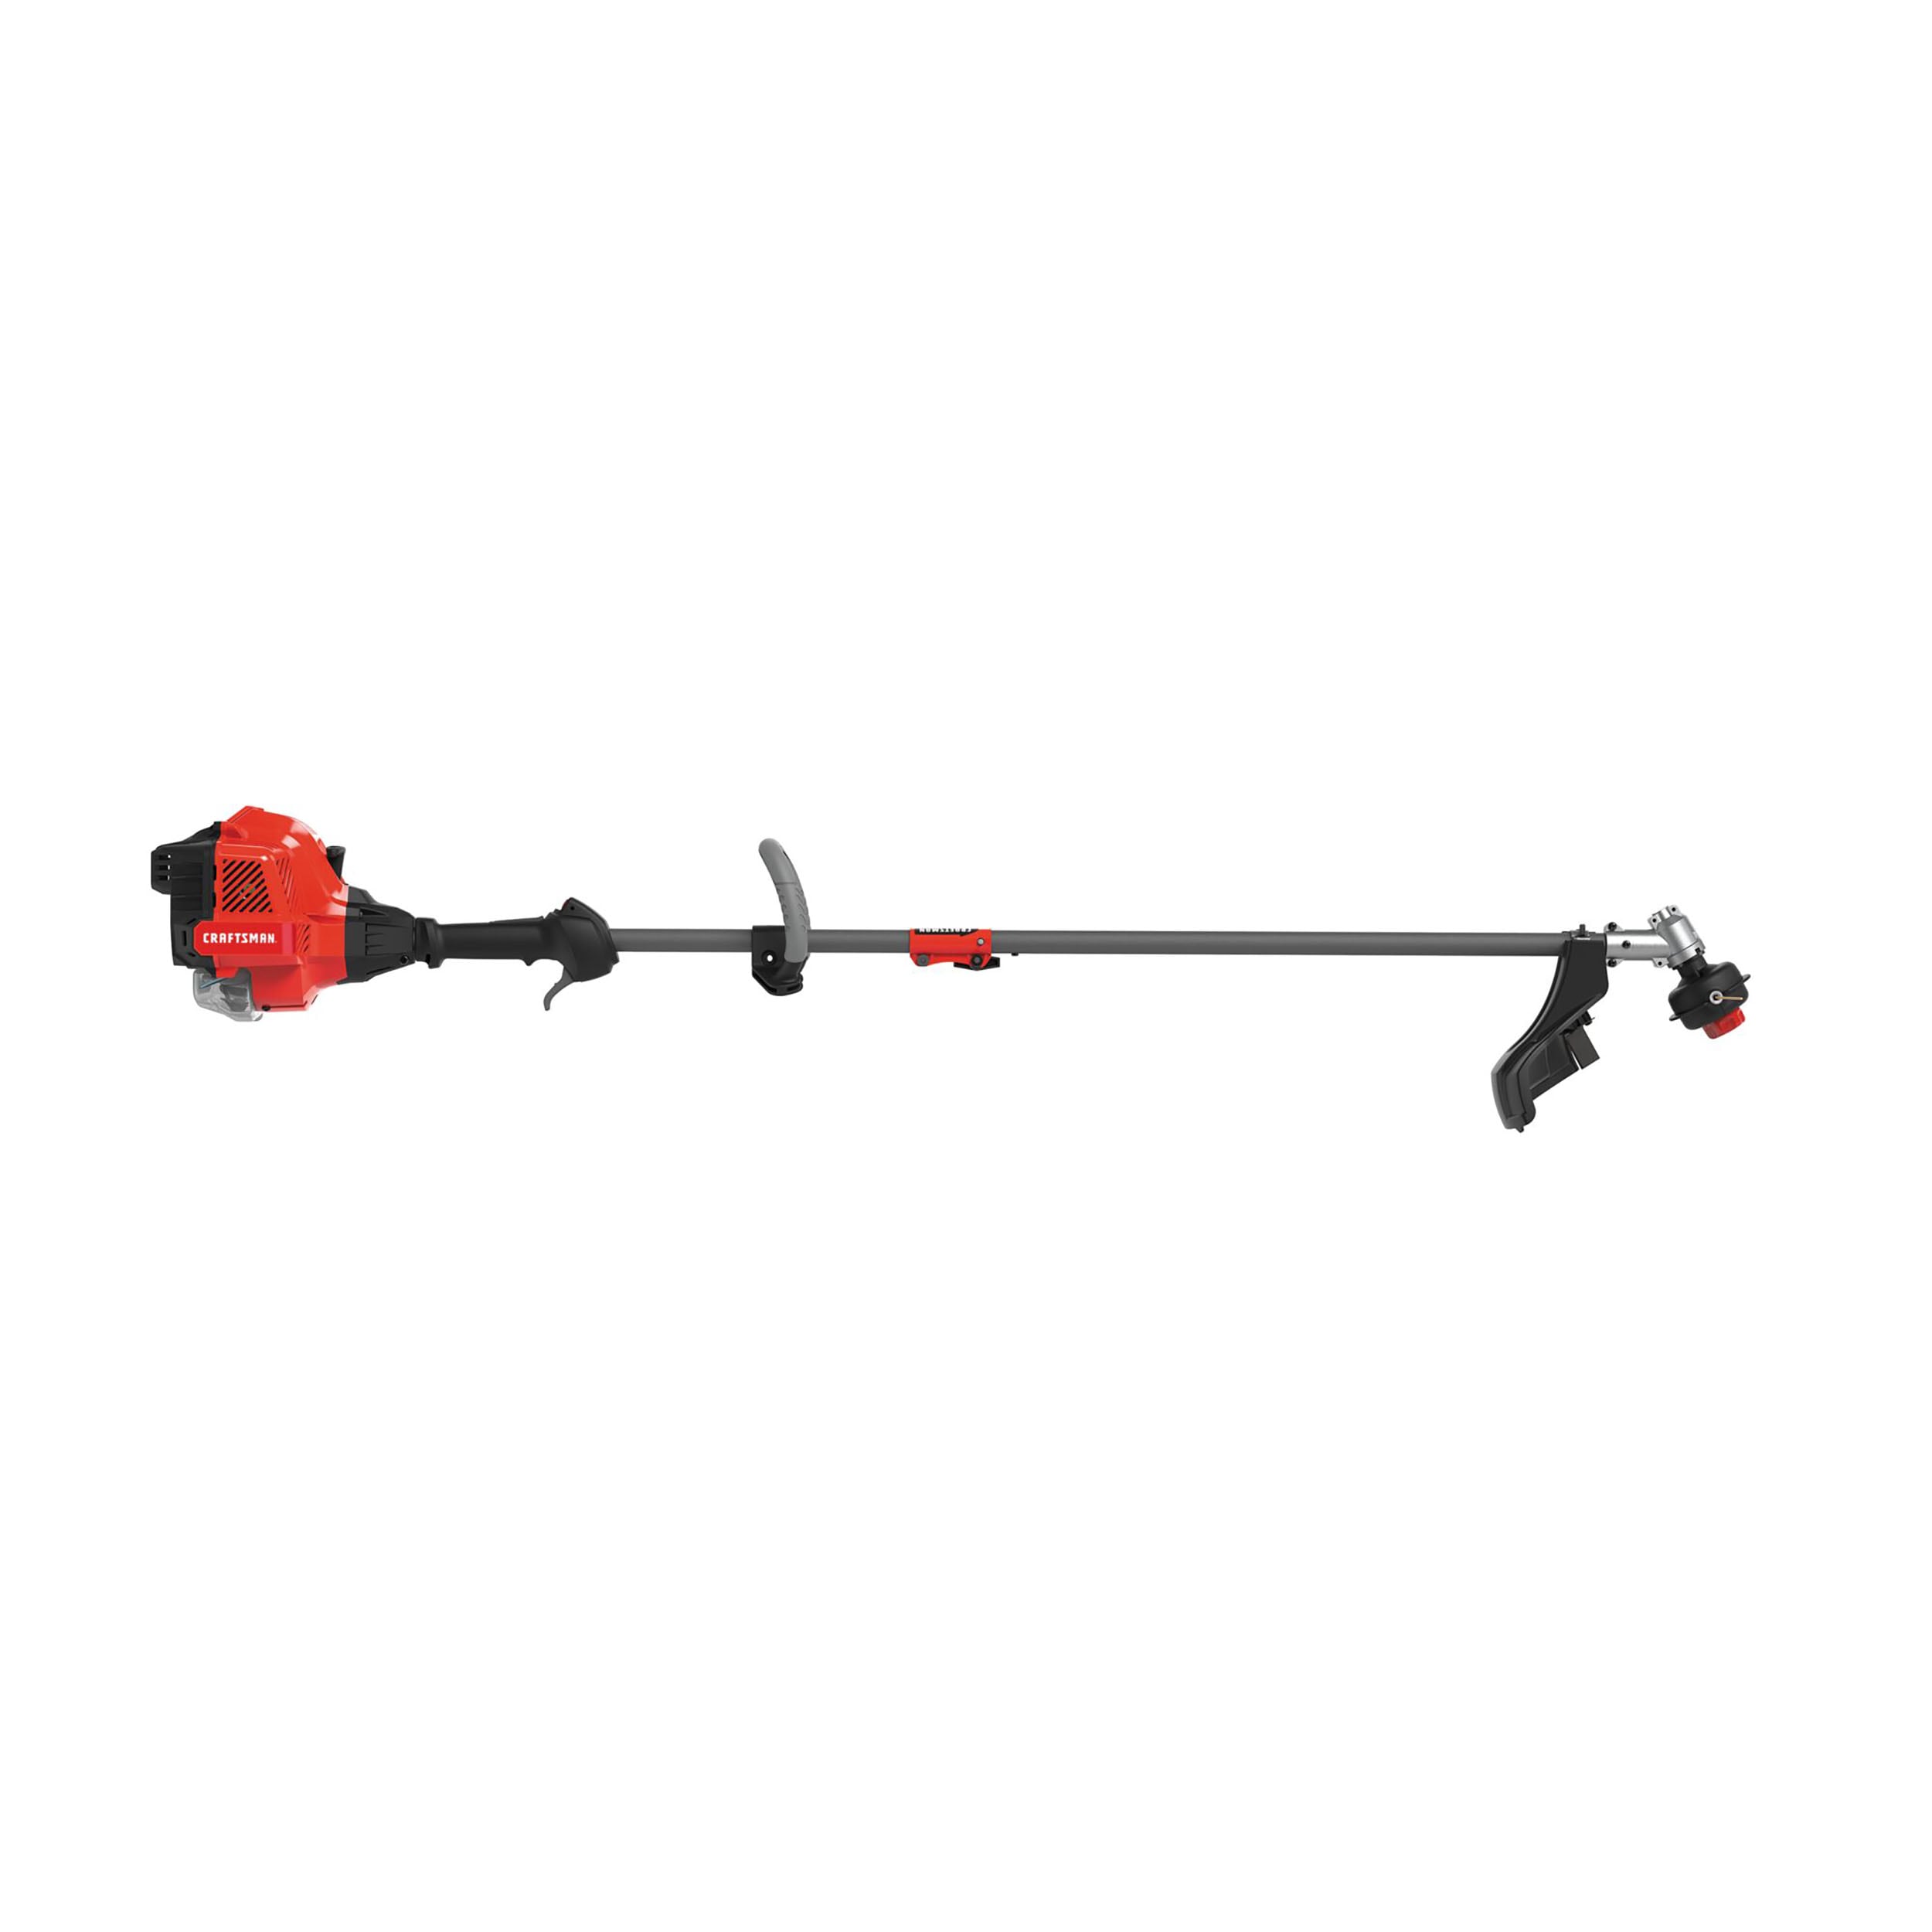 Black and Decker Auto Feed Spool Weed wacker Trimmer line - general for  sale - by owner - craigslist